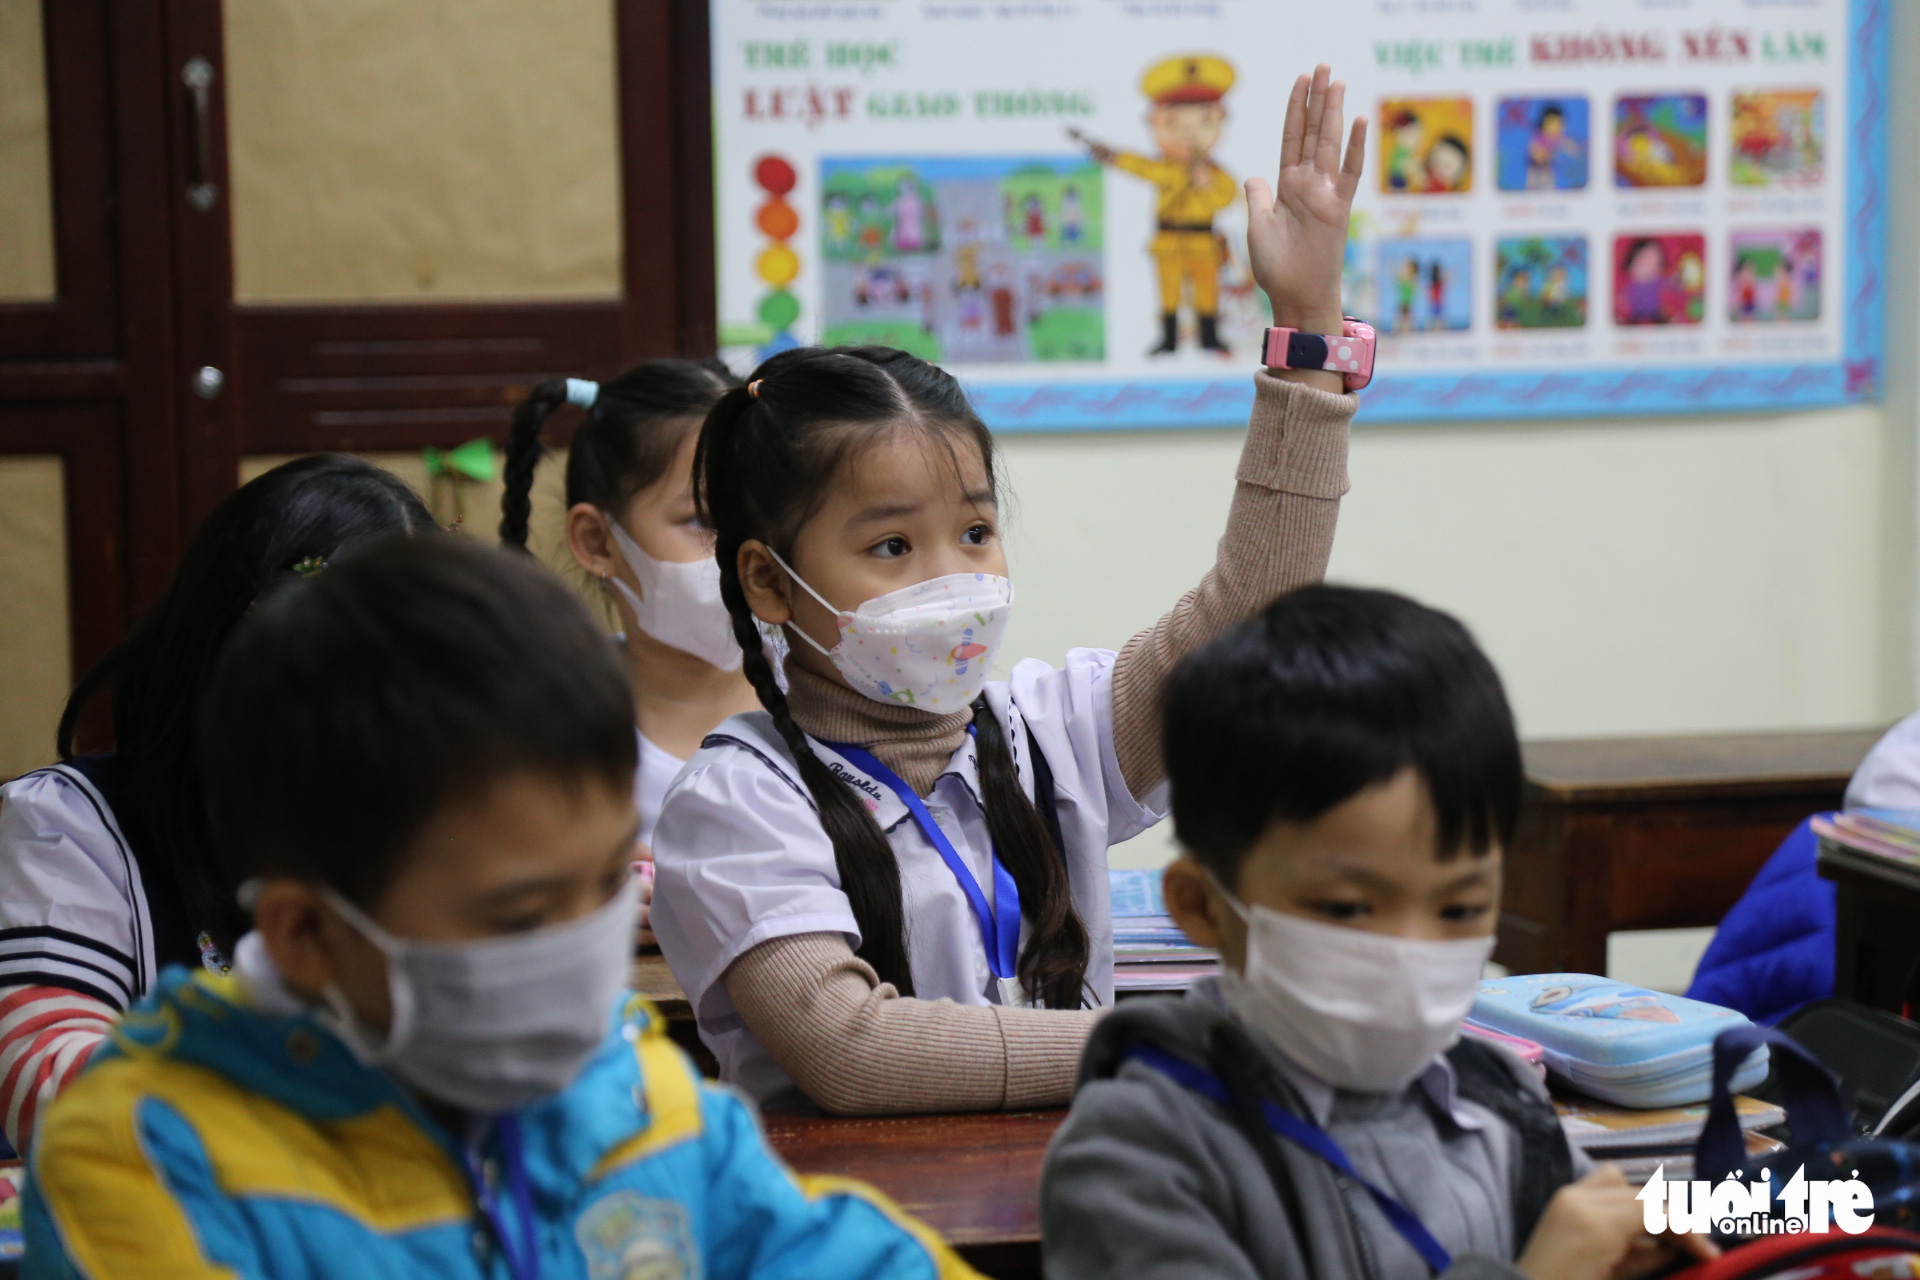 First graders attend a face-to-face class at Phu Dong Elementary School in Hai Chau District, Da Nang City, December 6, 2021. Photo: Tuoi Tre